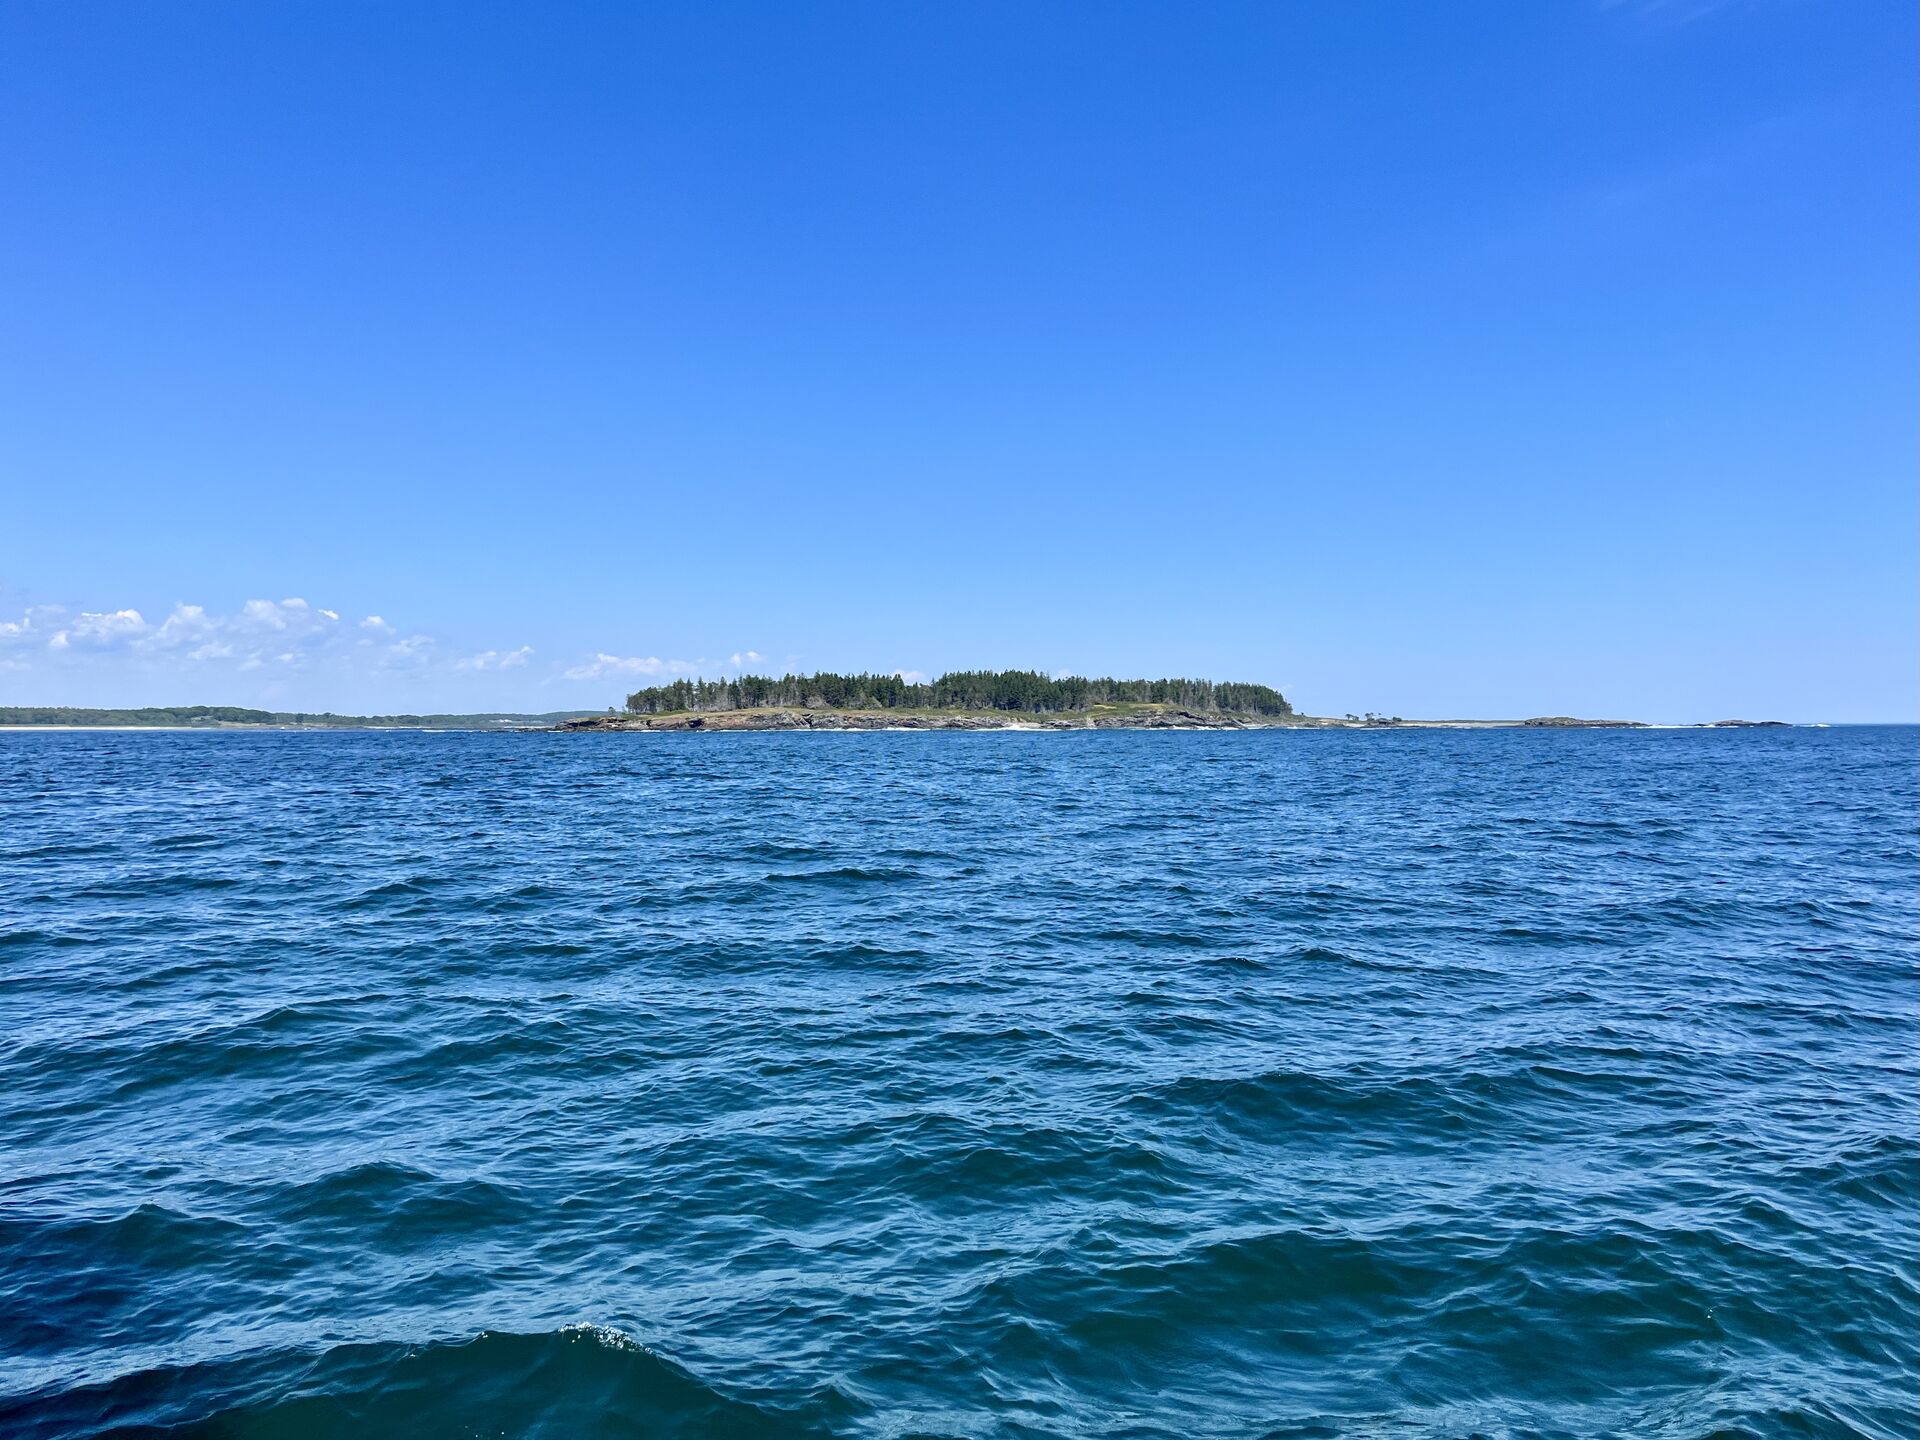 The approach to Richmond Island.